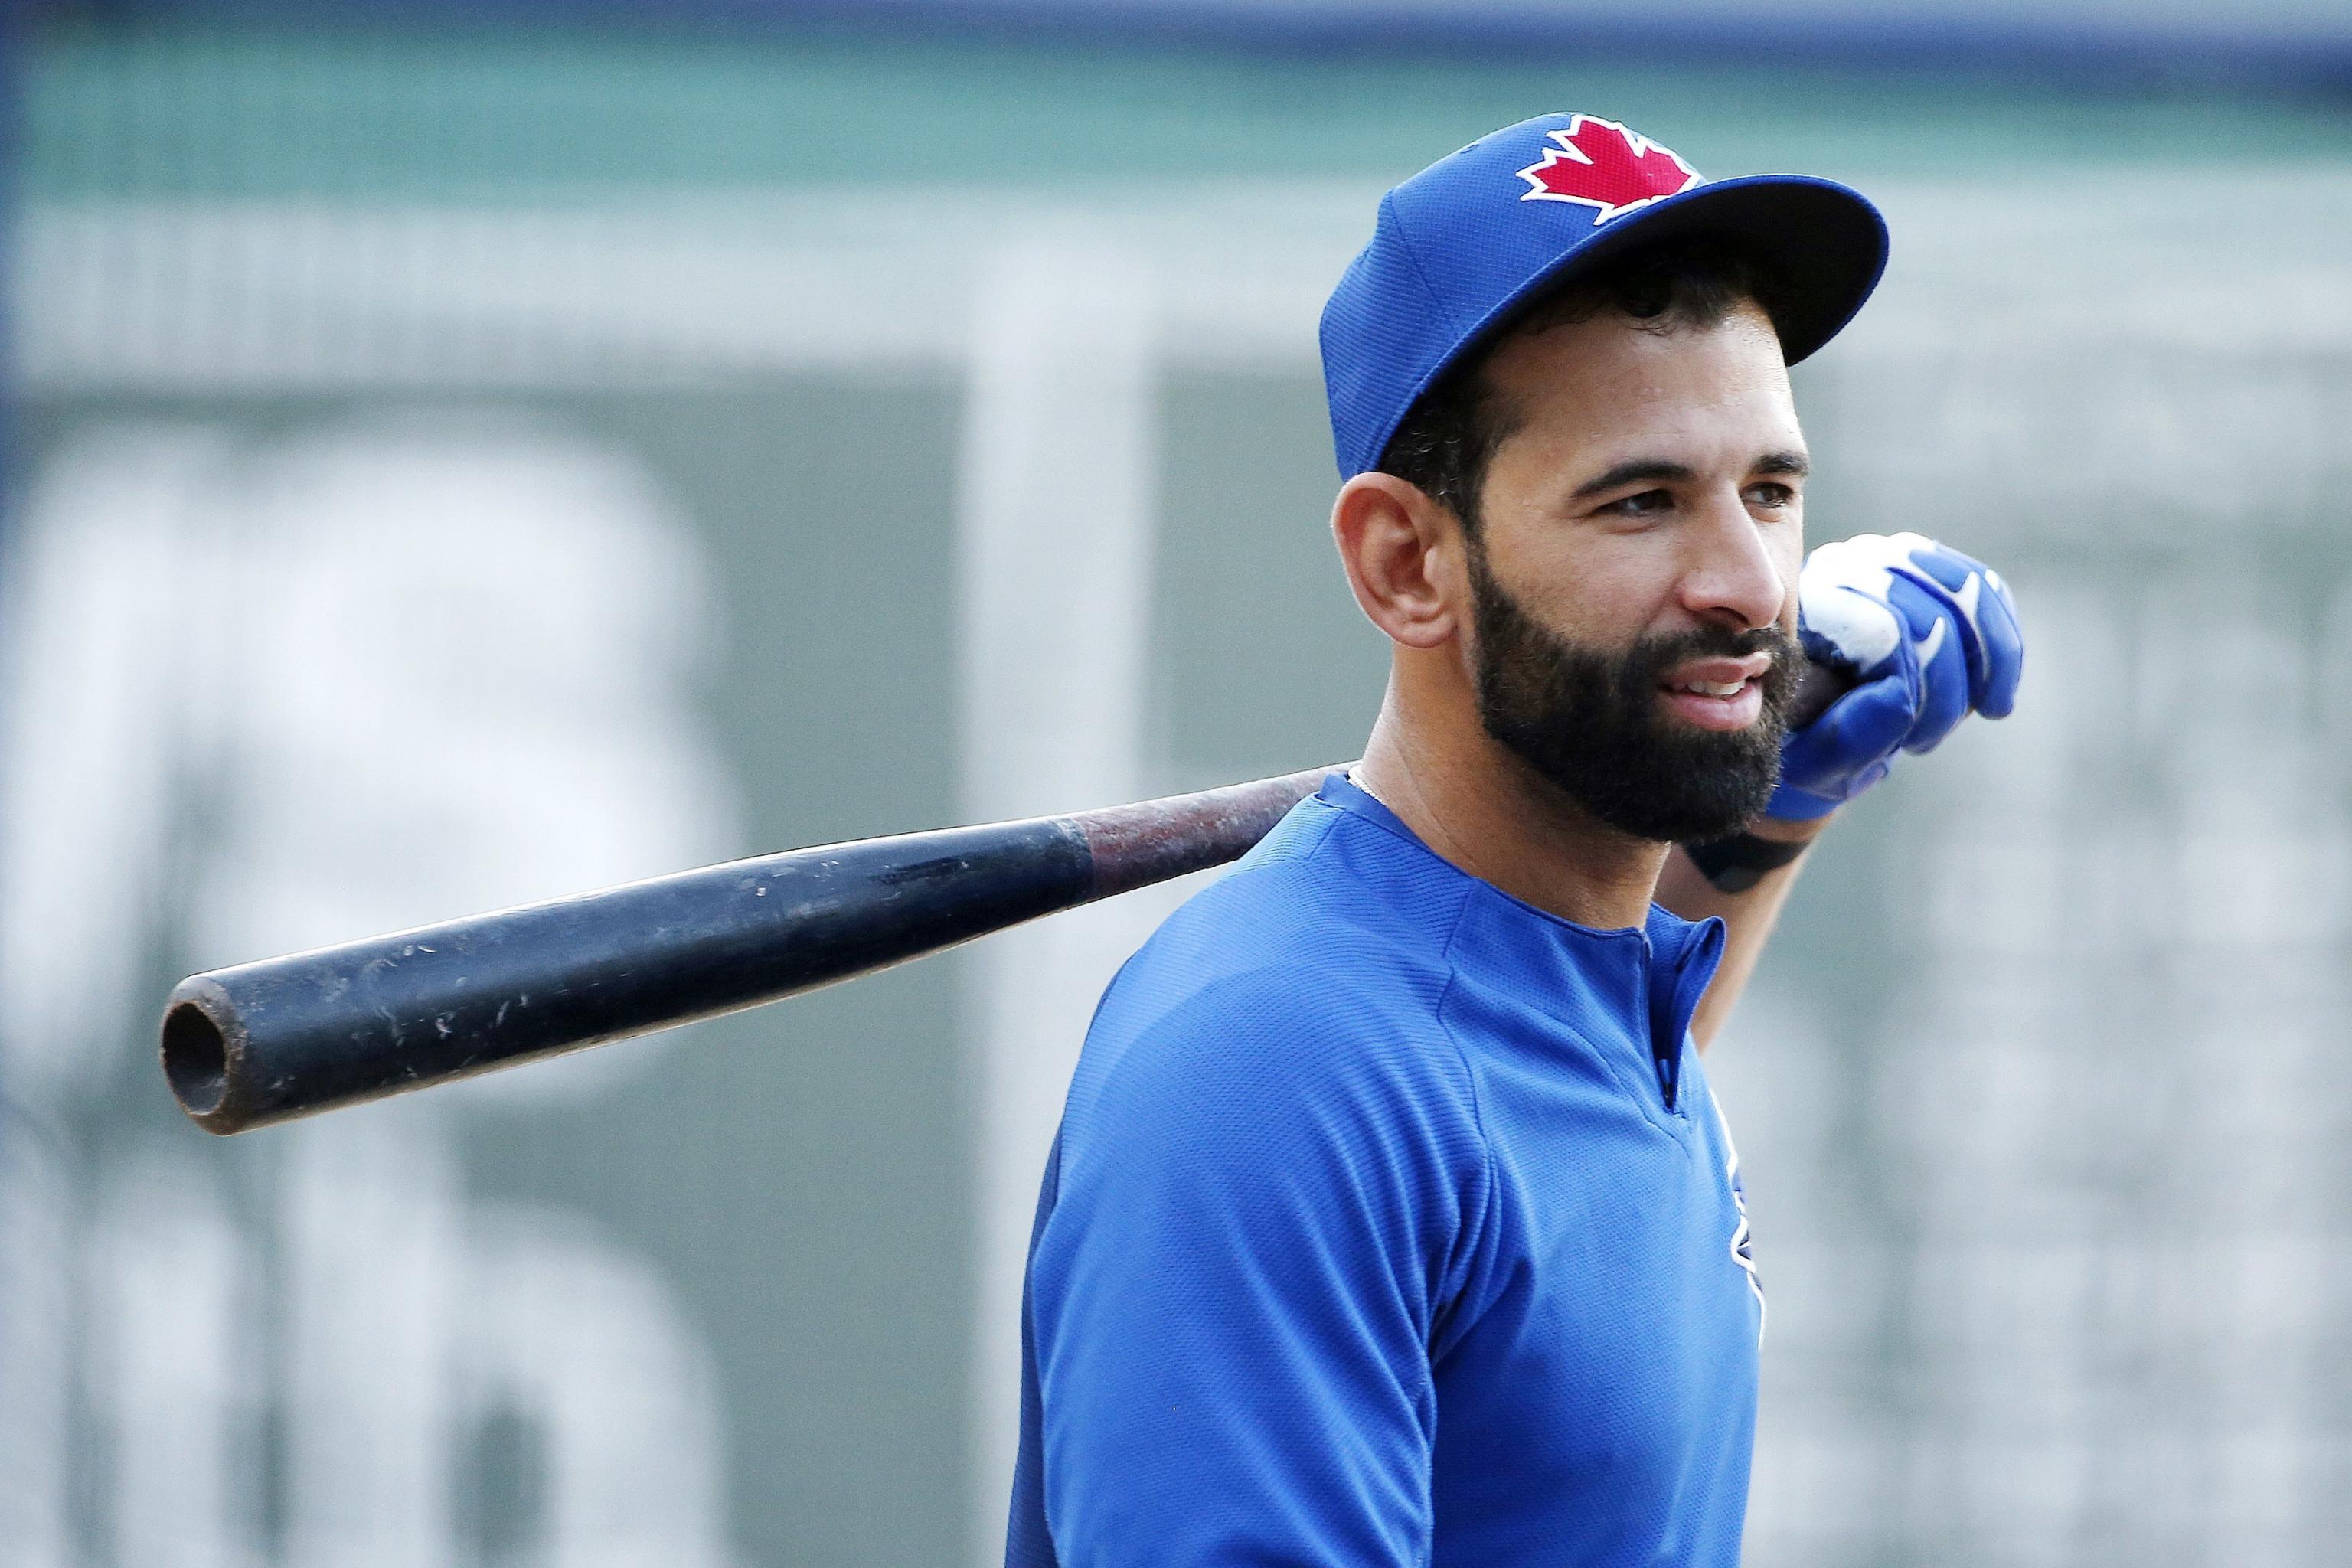 Impending free agent Jose Bautista won't give Blue Jays hometown discount  - NBC Sports